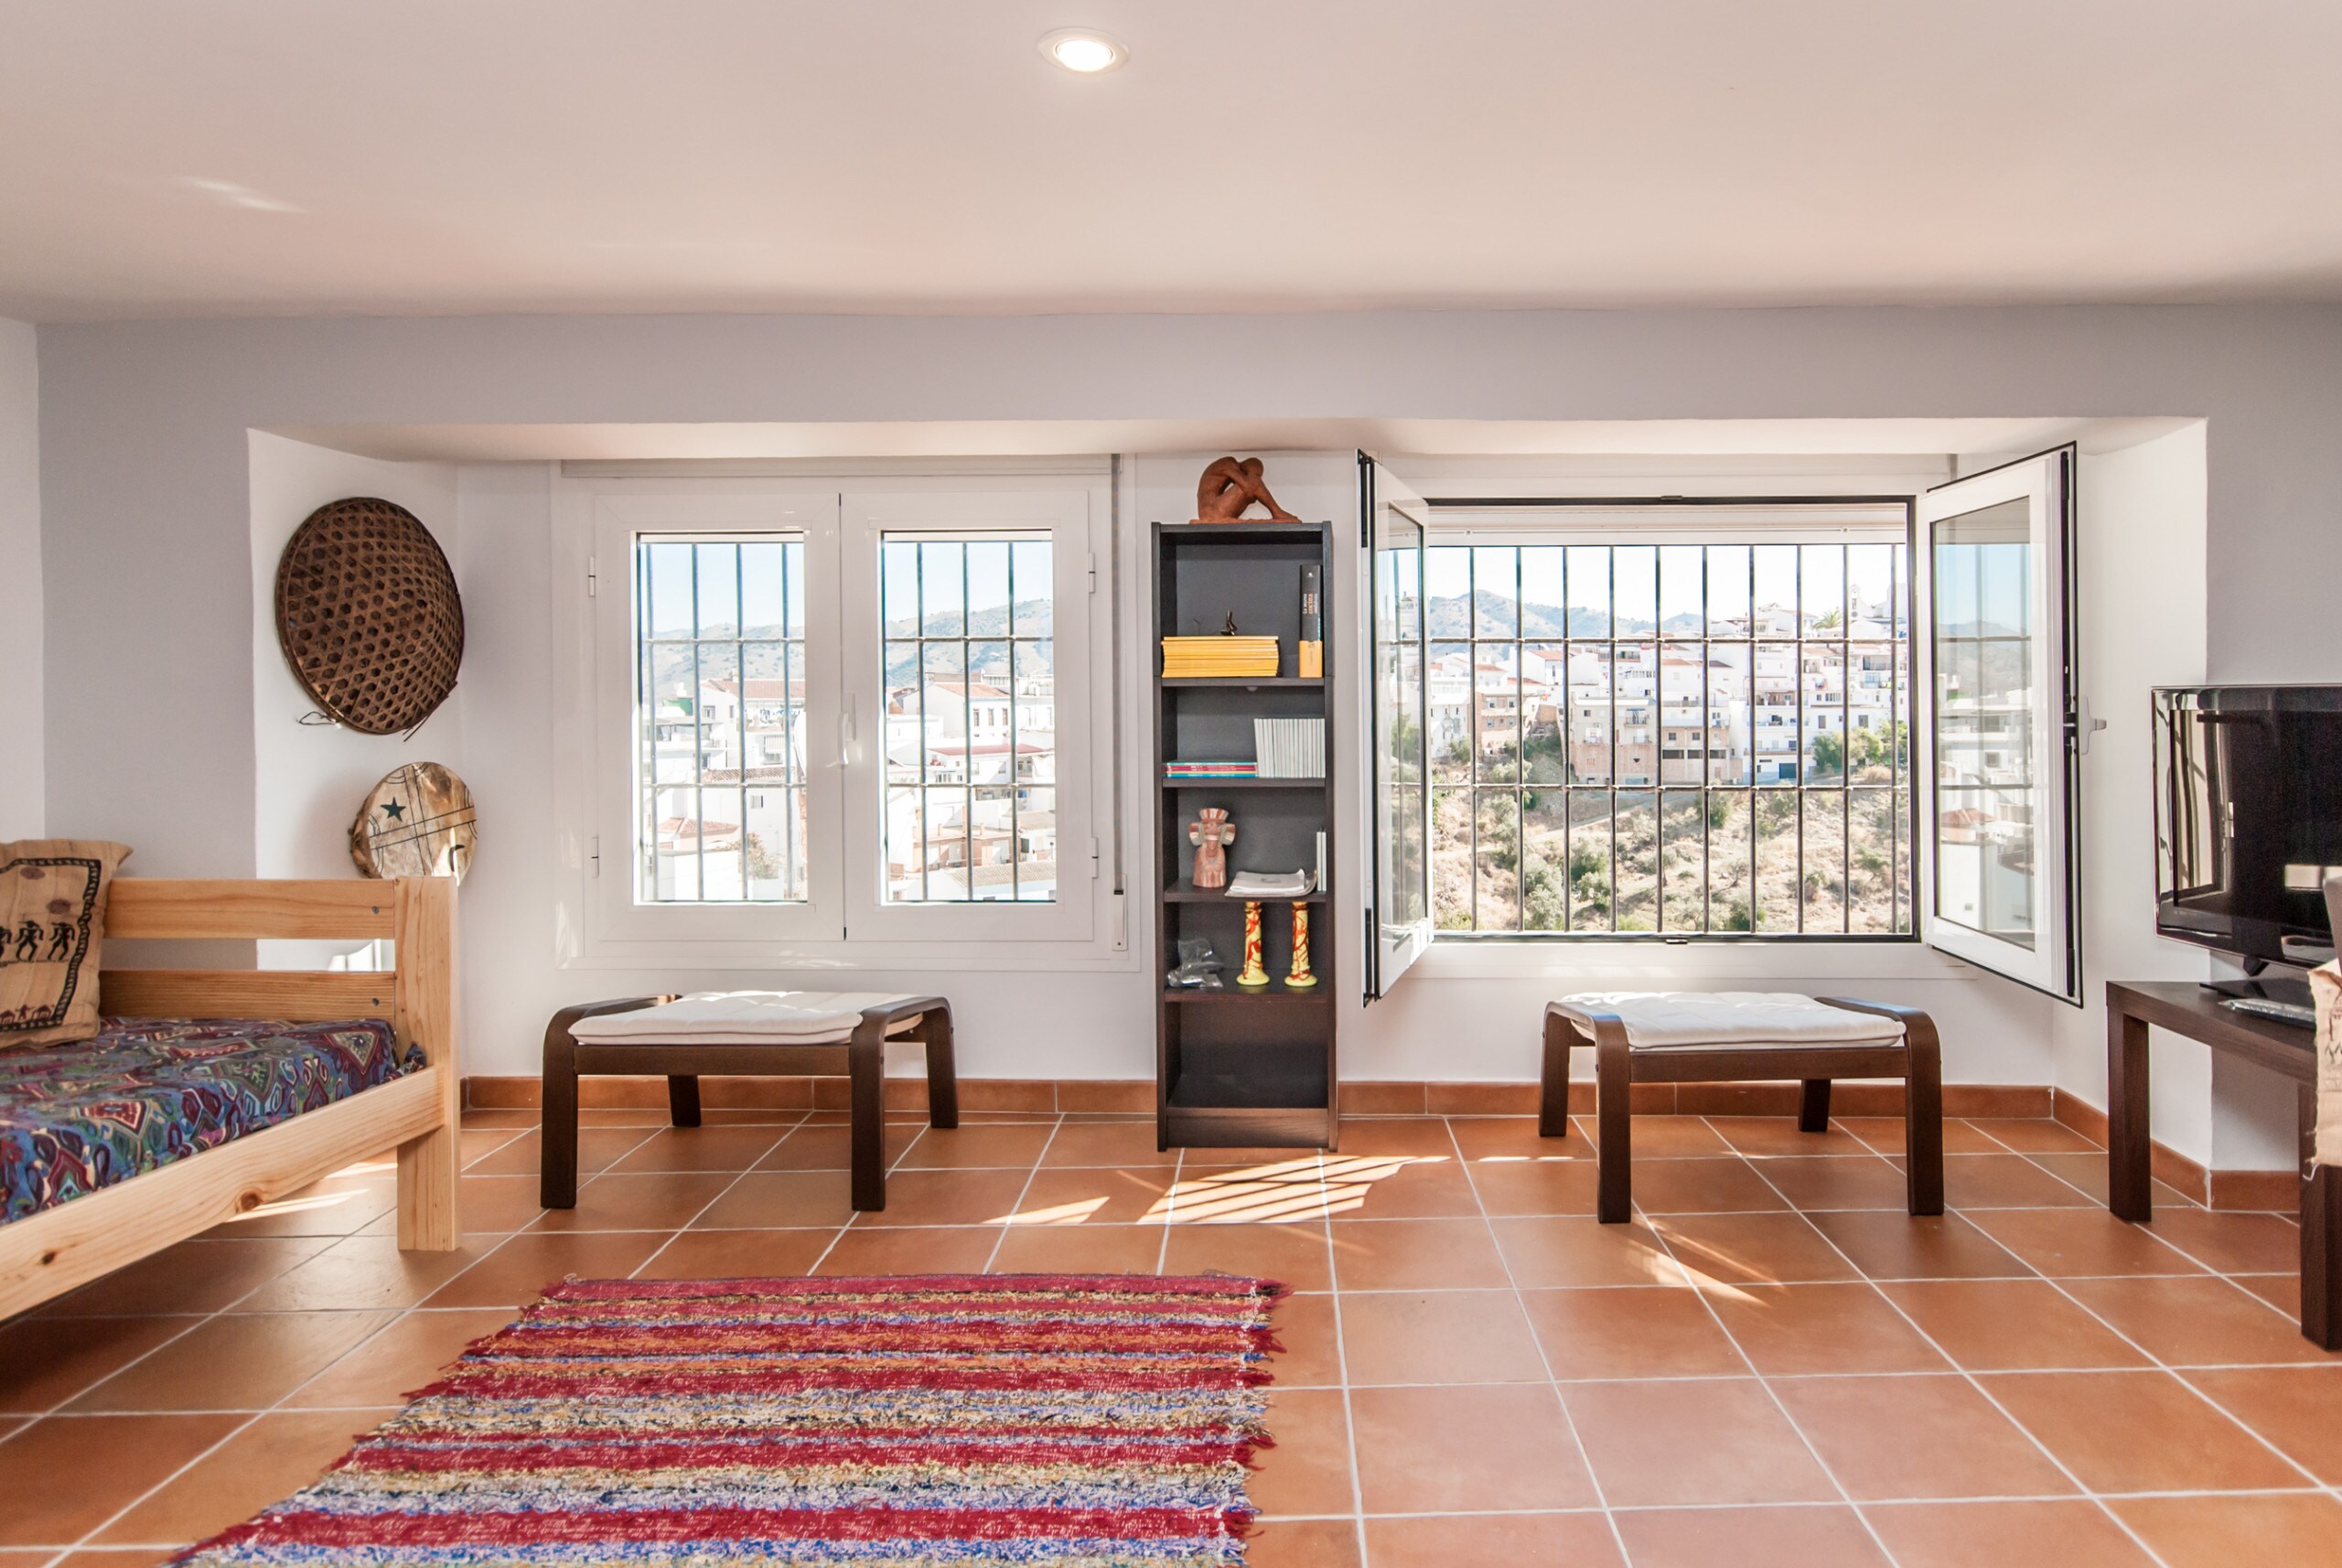 Enjoy the living room of this house near the Caminito del Rey